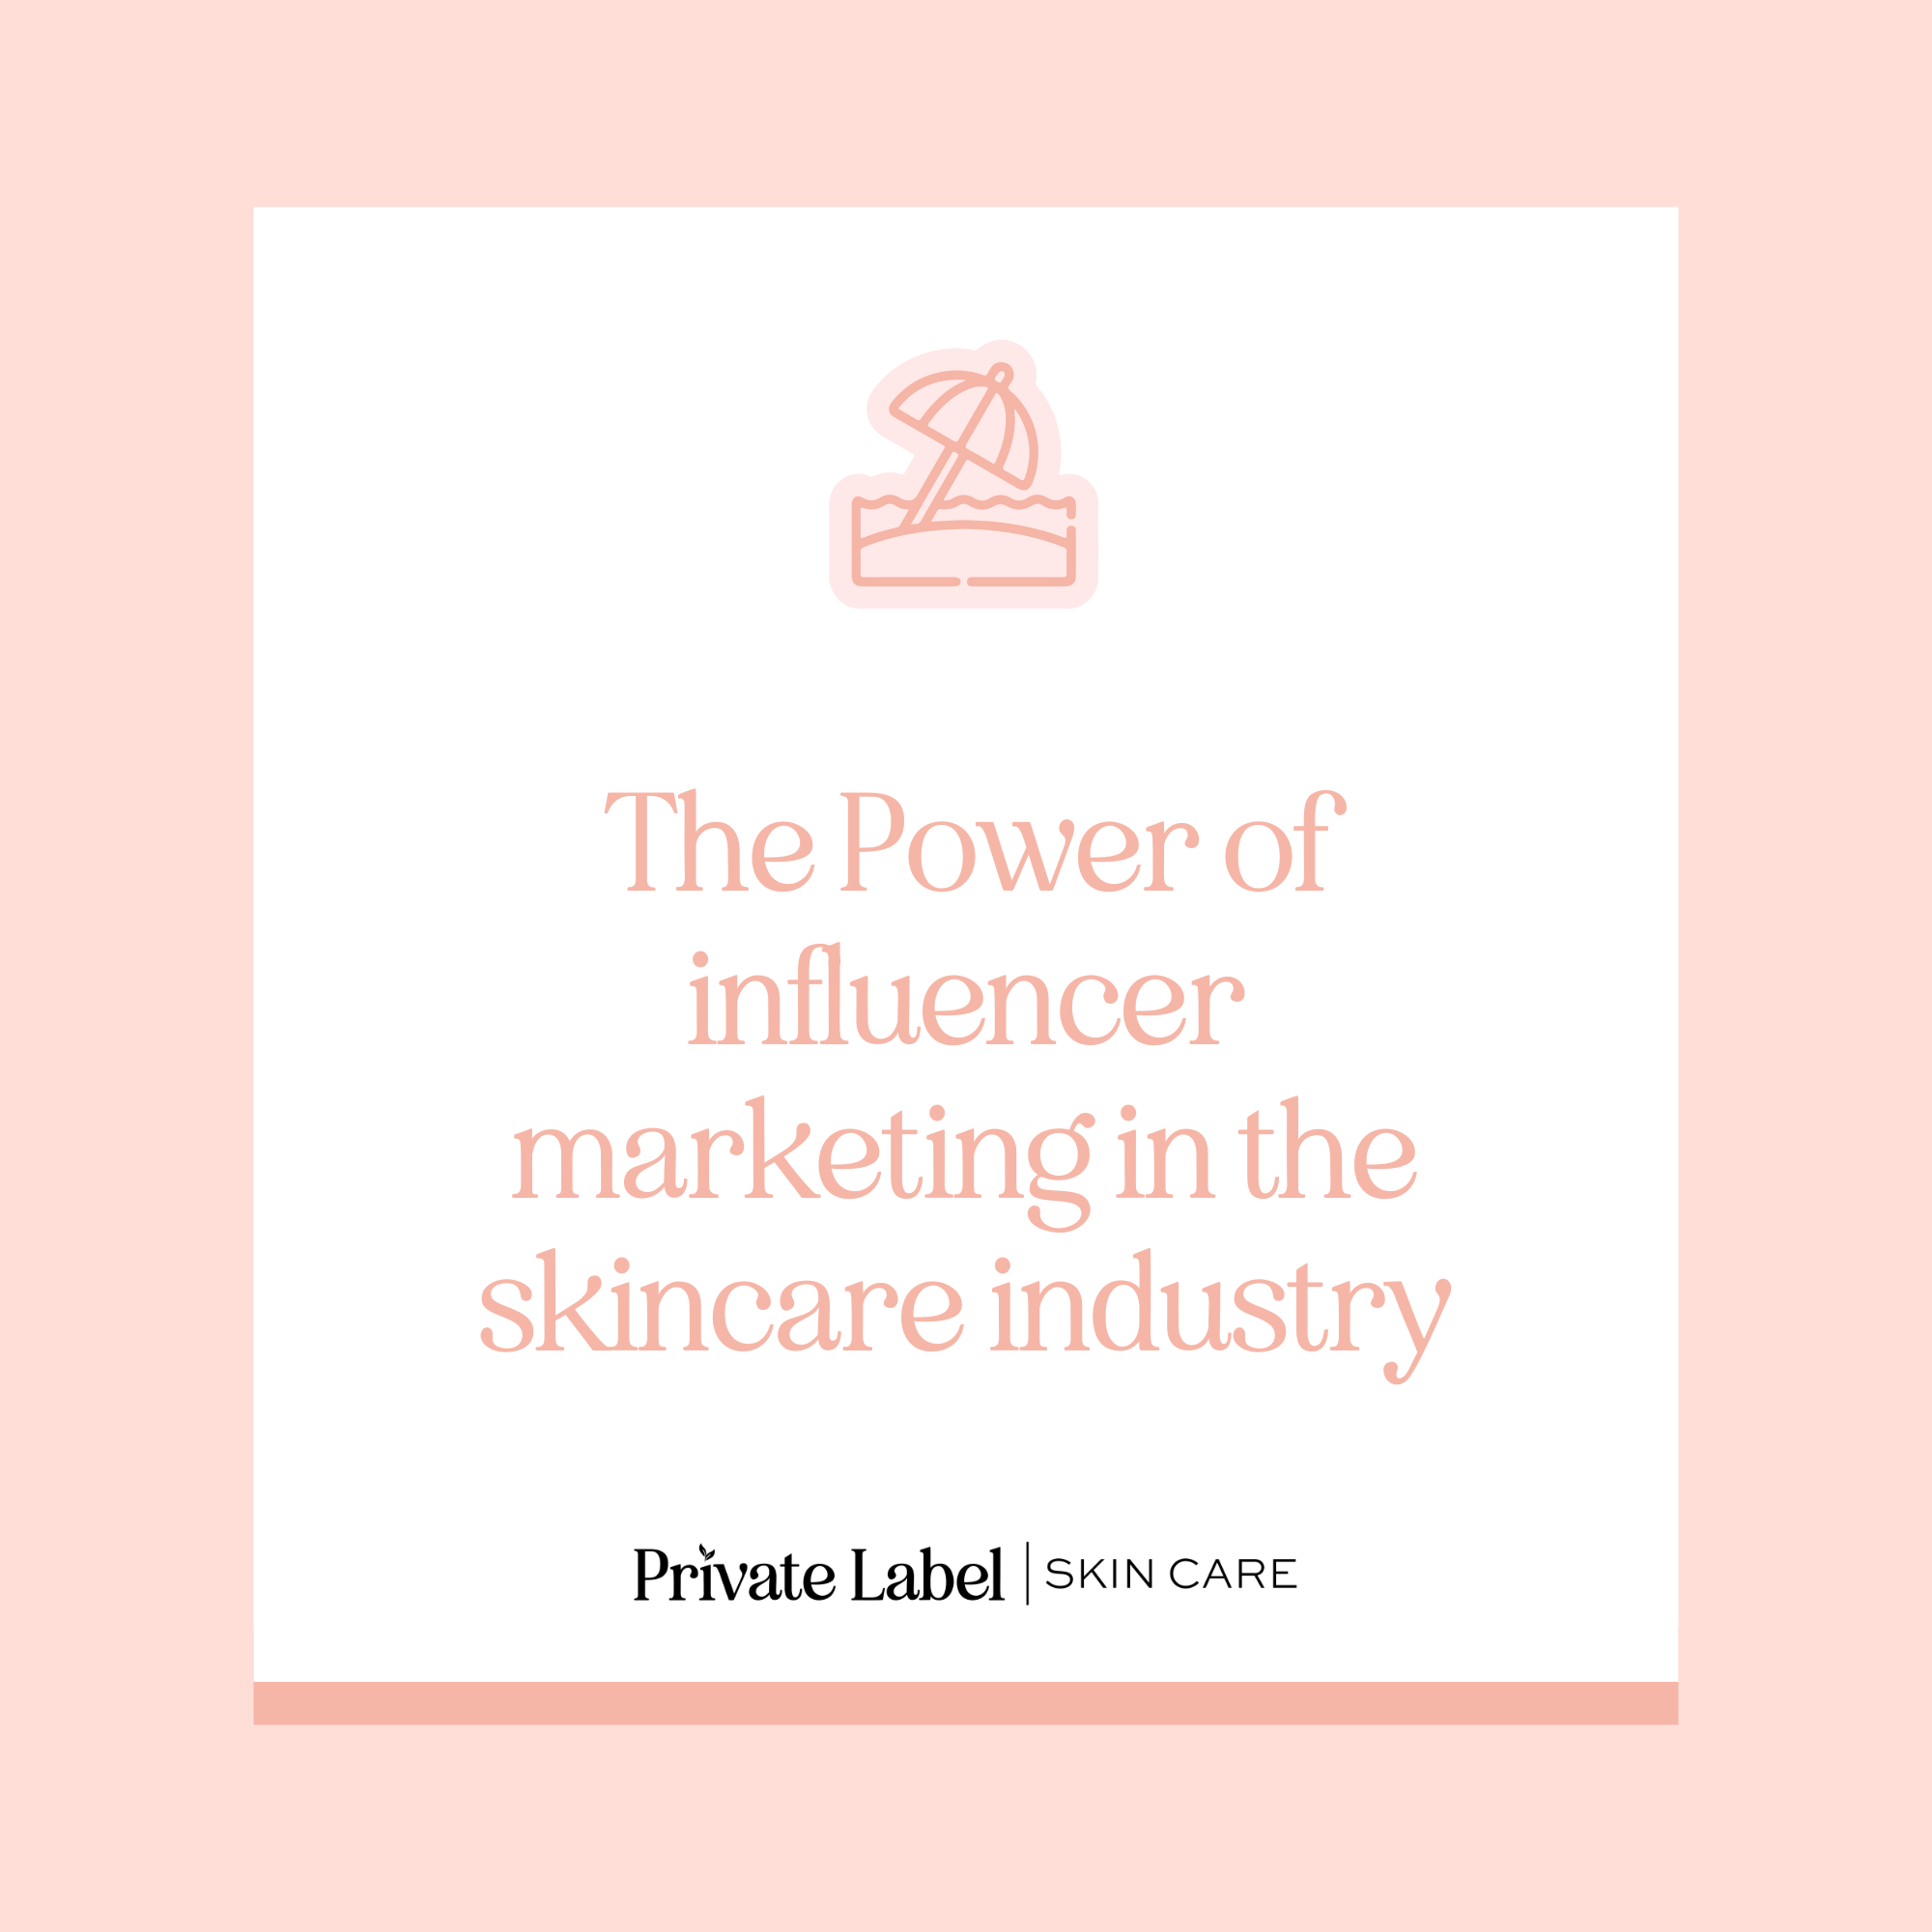 The Power of influencer marketing in the skincare industry